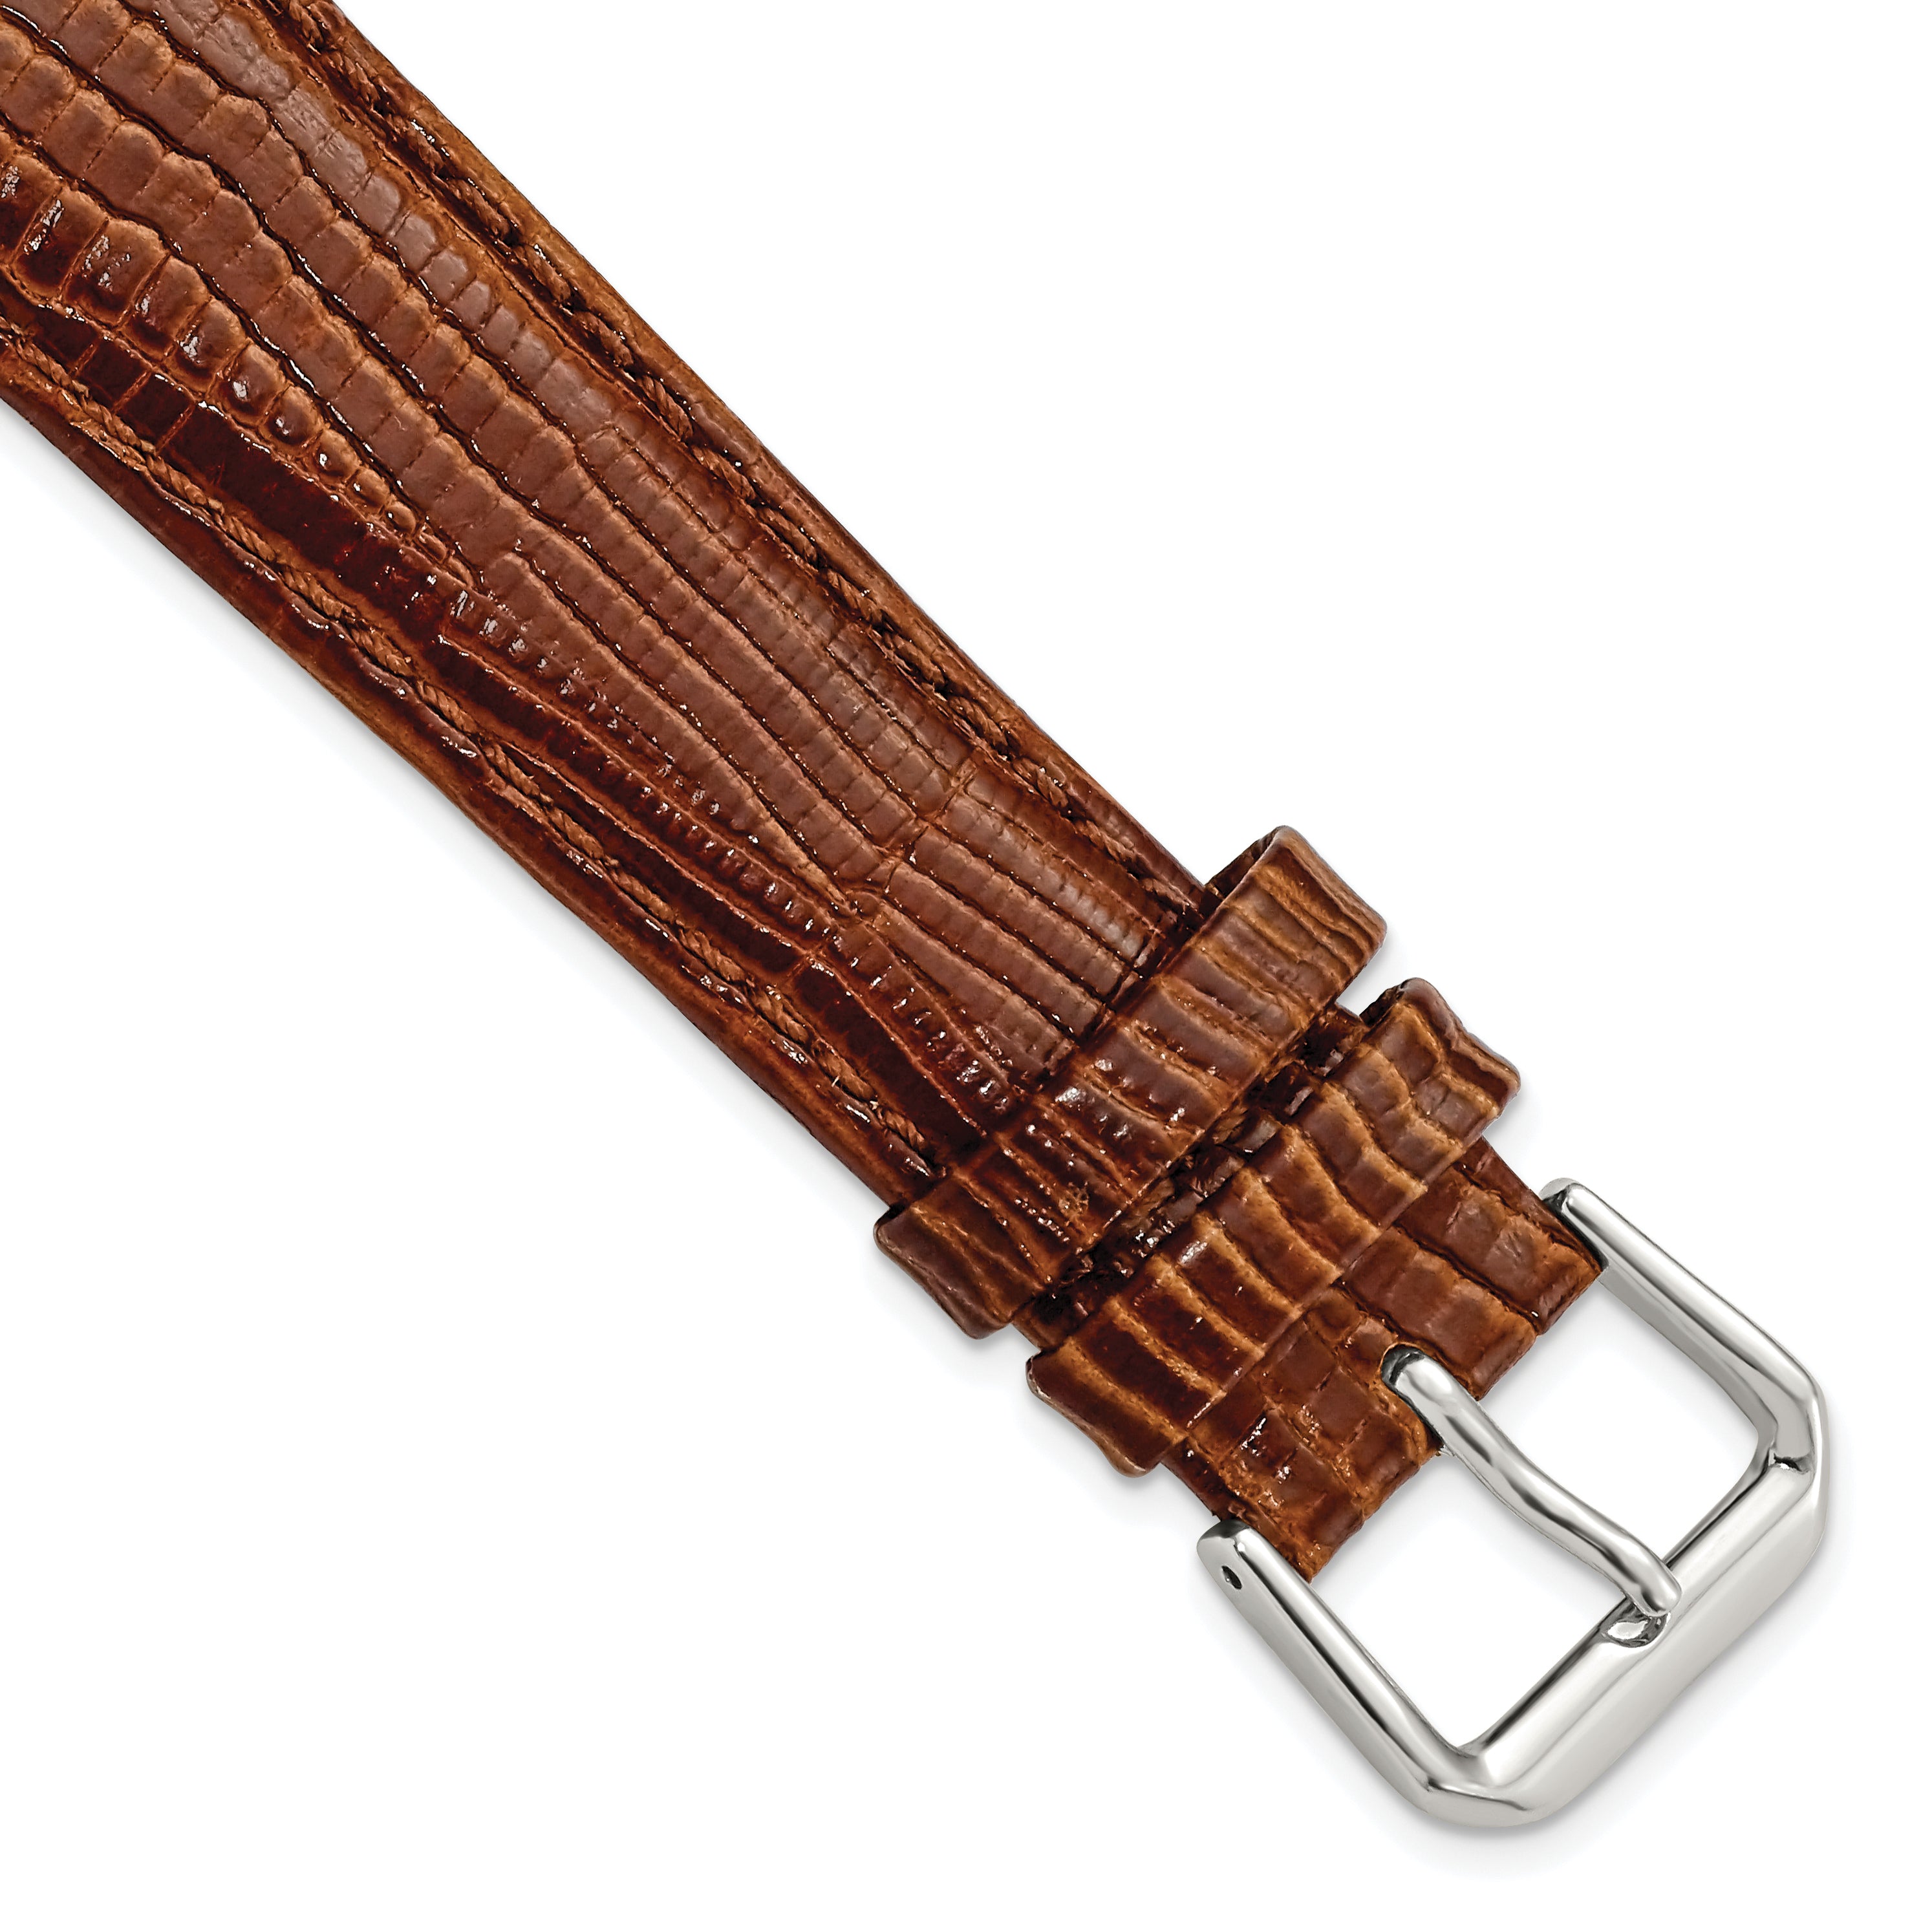 DeBeer 19mm Havana Brown Snake Grain Leather with Silver-tone Buckle 7.5 inch Watch Band